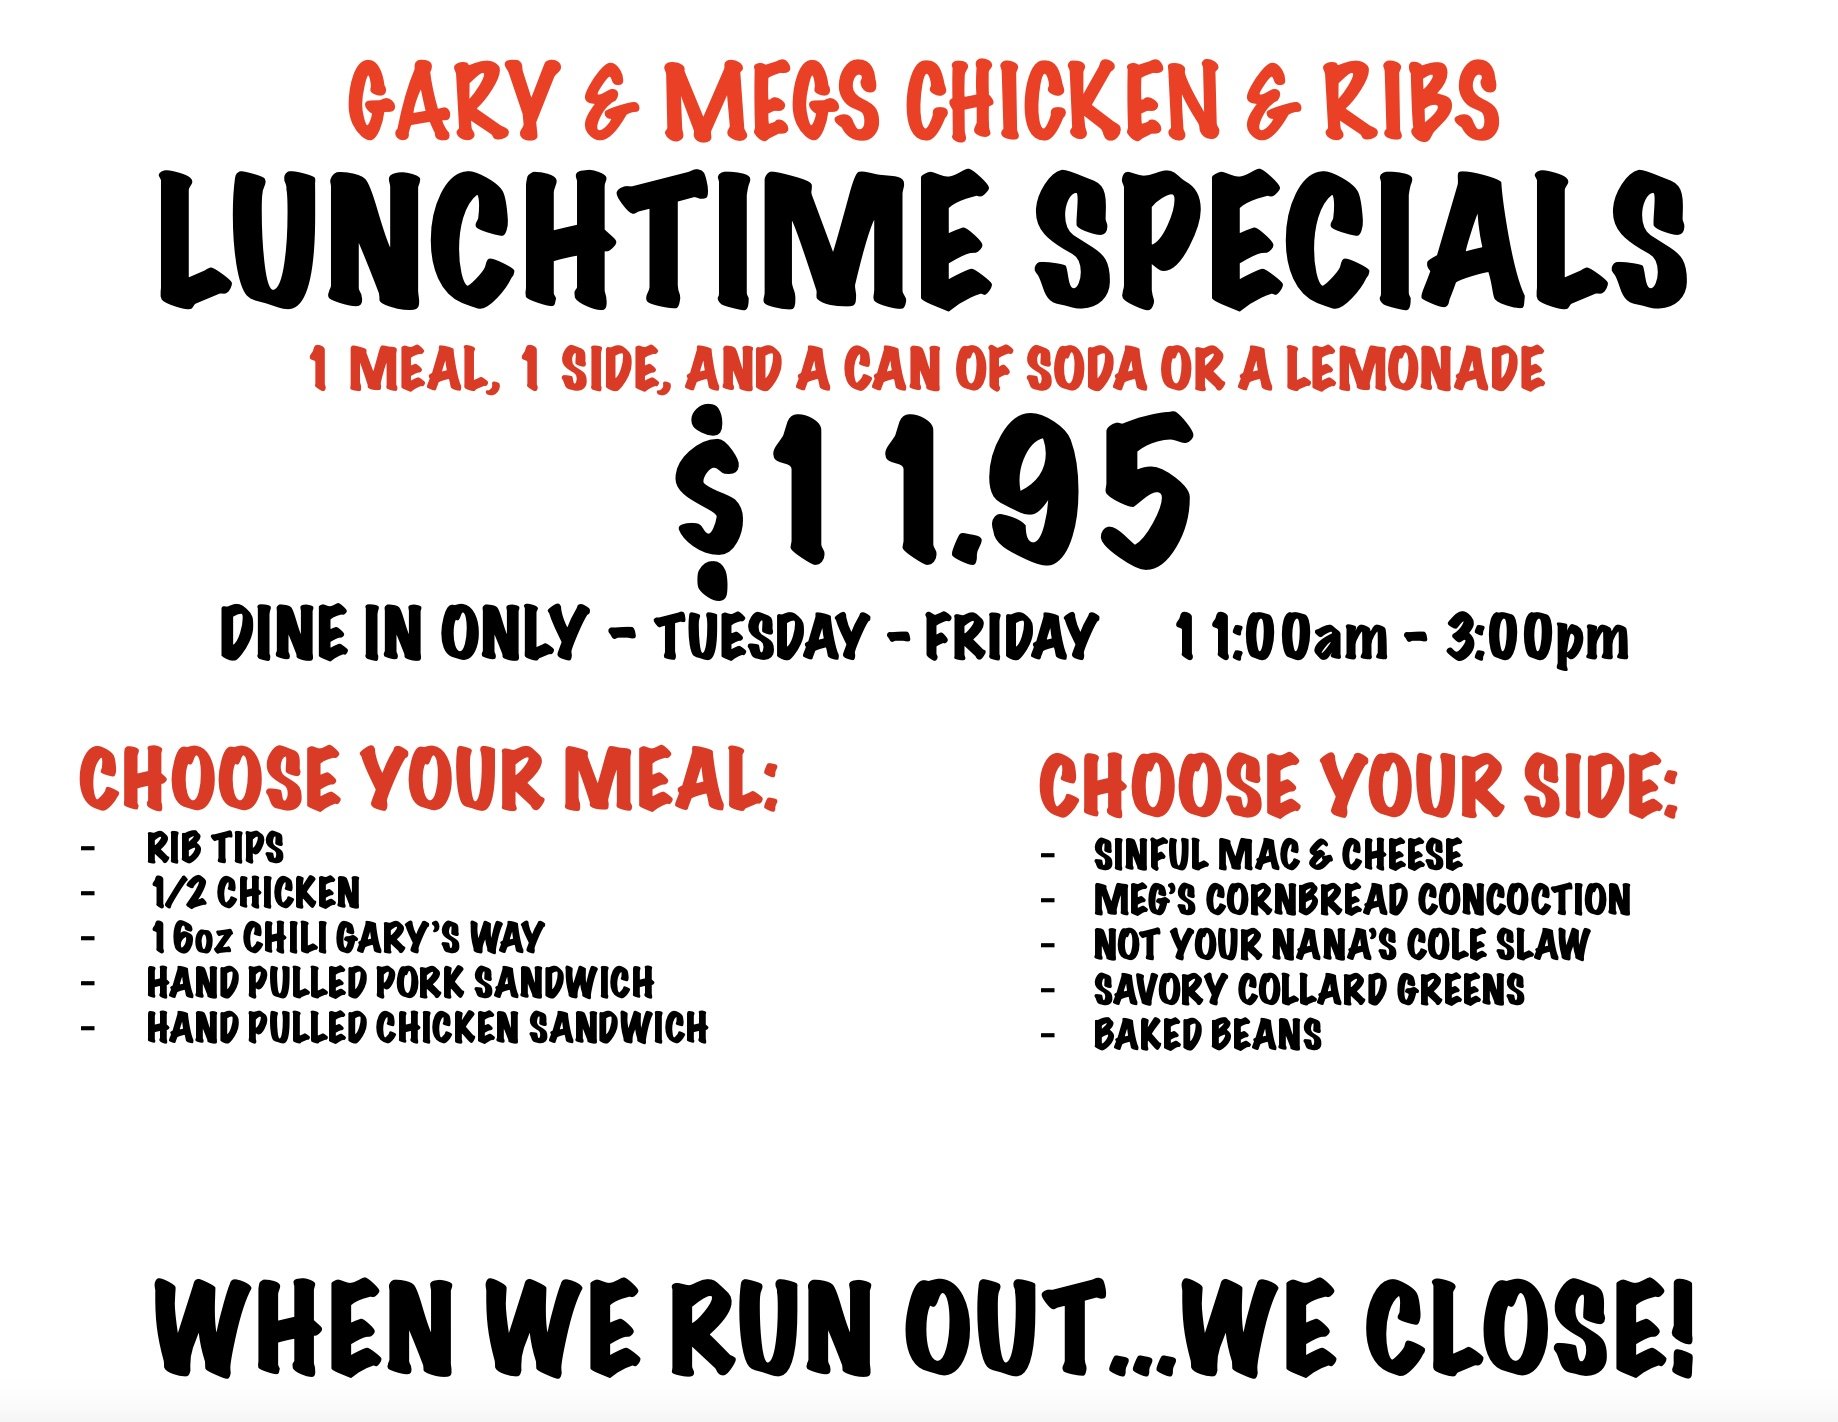 Pocket-friendly lunchtime specials